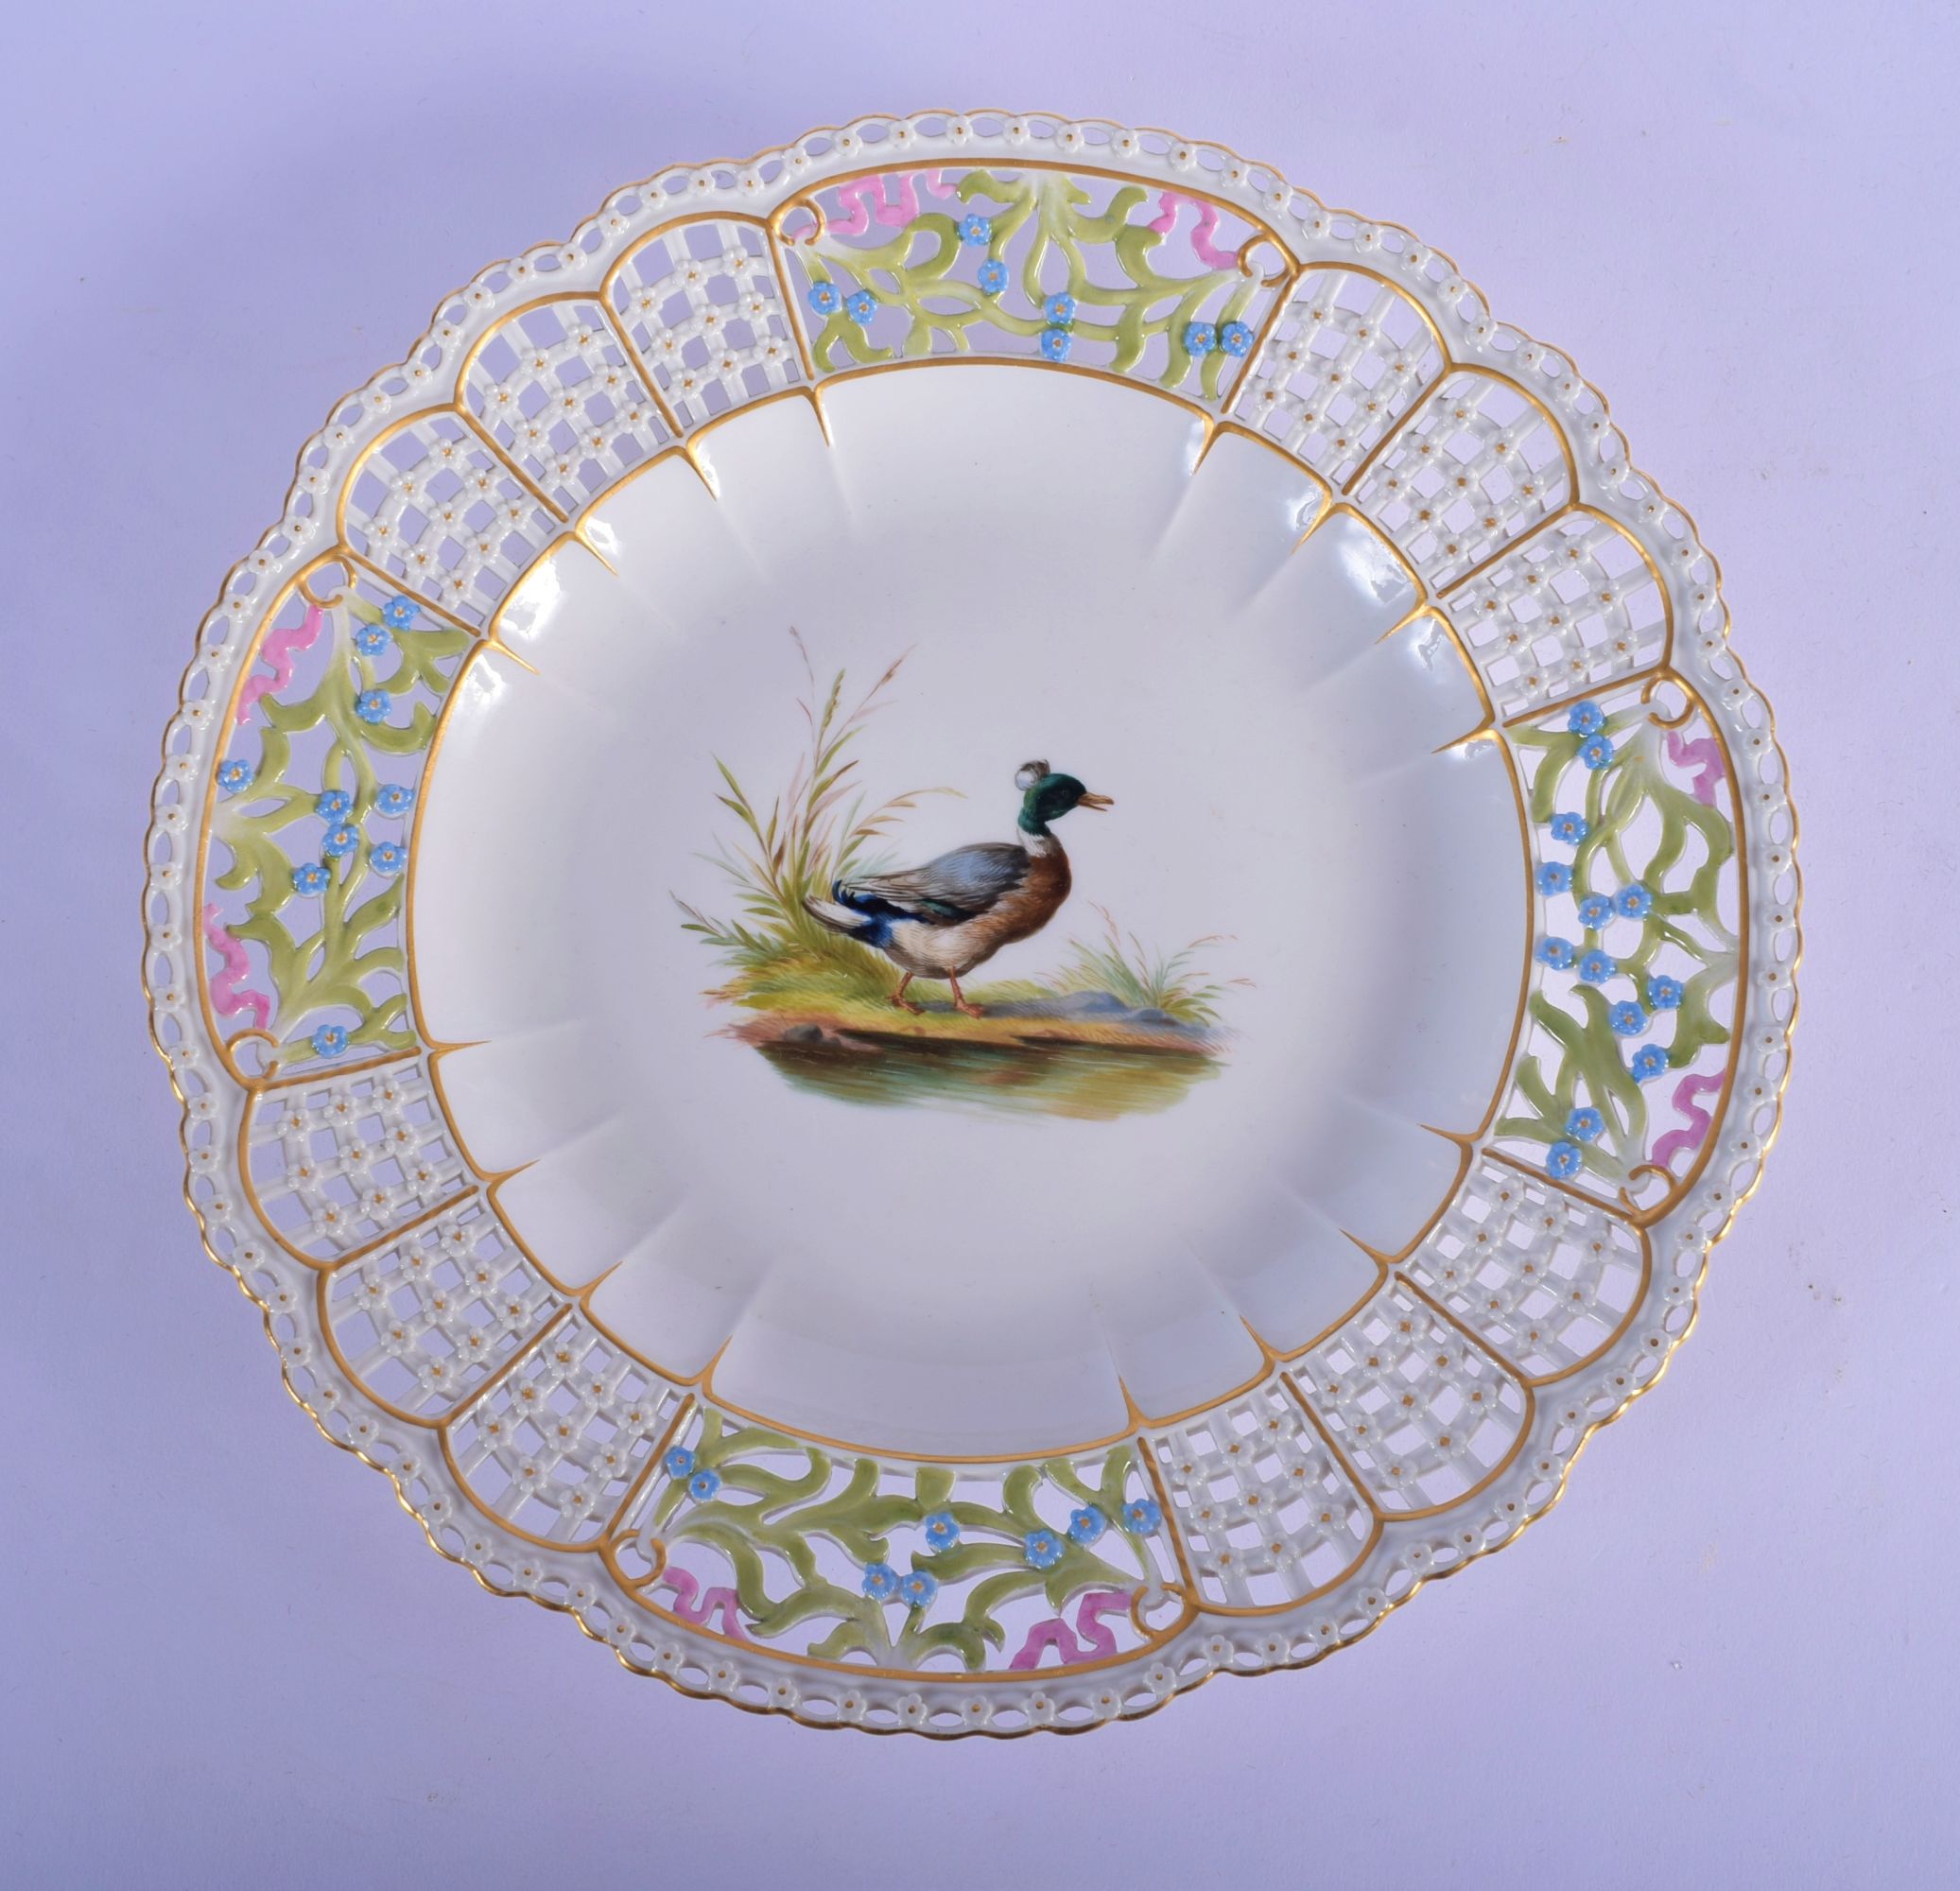 AN ANTIQUE MEISSEN RETICULATED PORCELAIN DISH painted with a duck. 24.5 cm diameter.